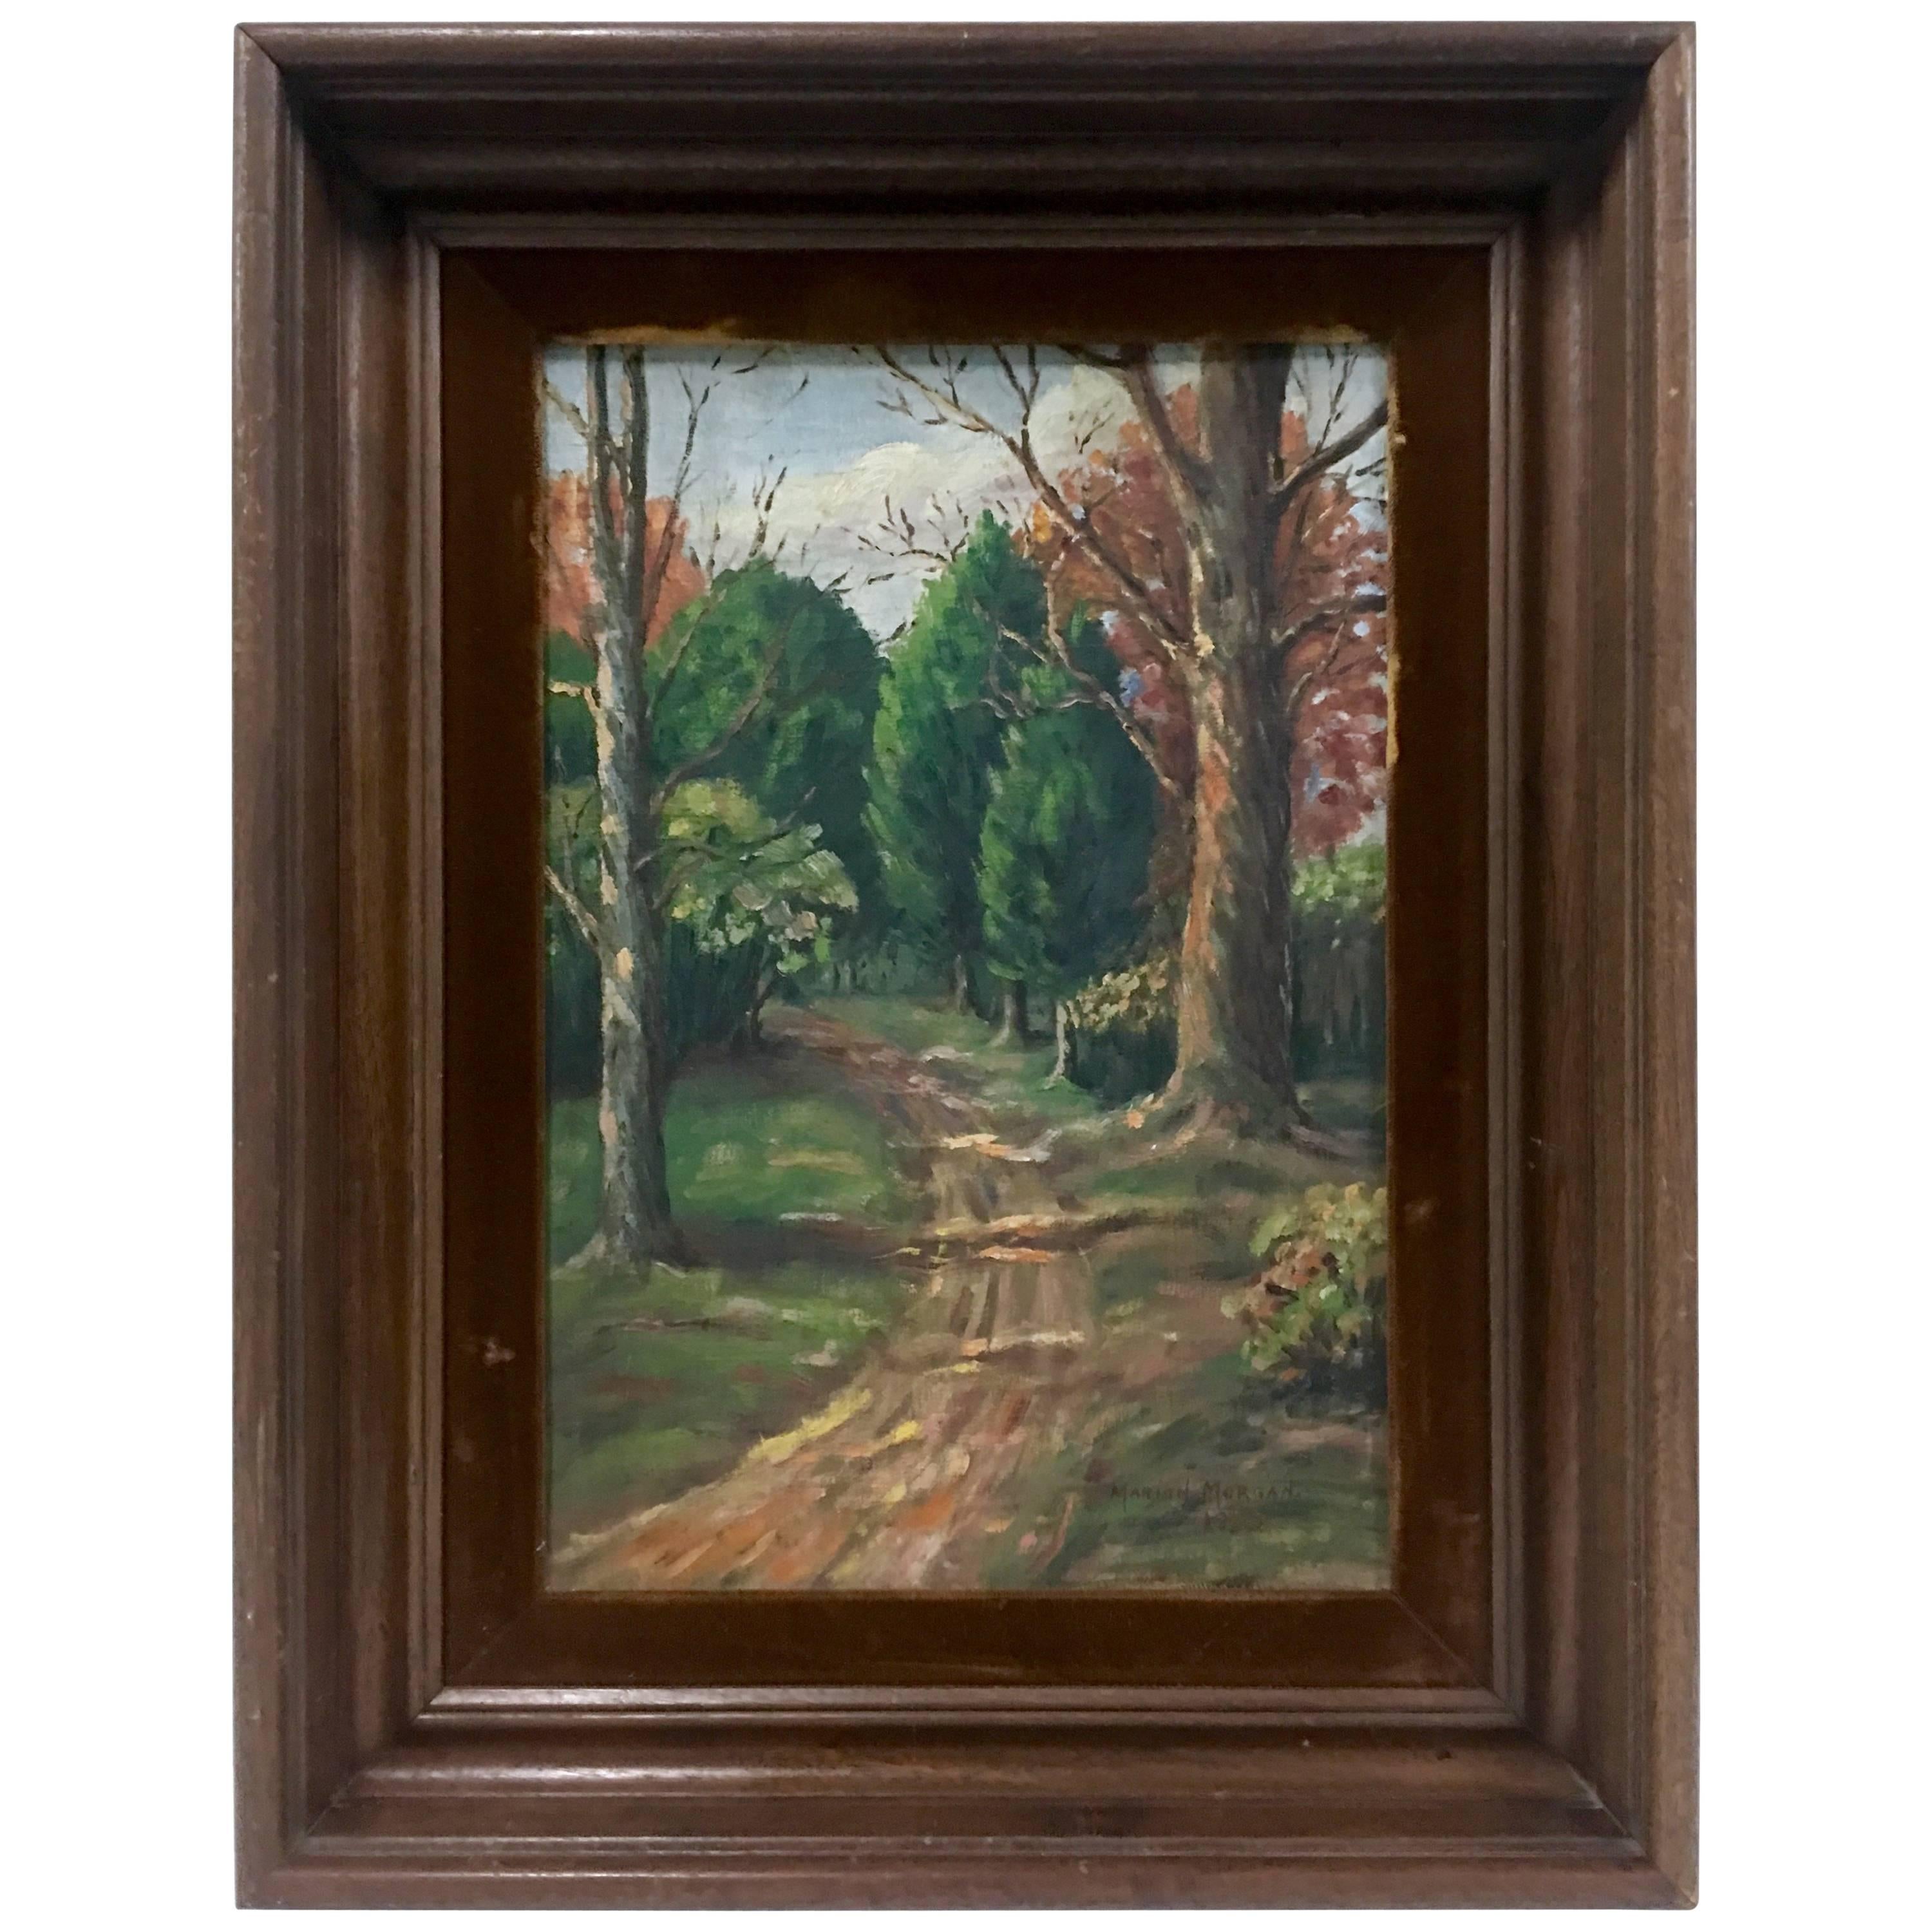 1932 Original Oil On Canvas Painting By, Marion Morgan For Sale